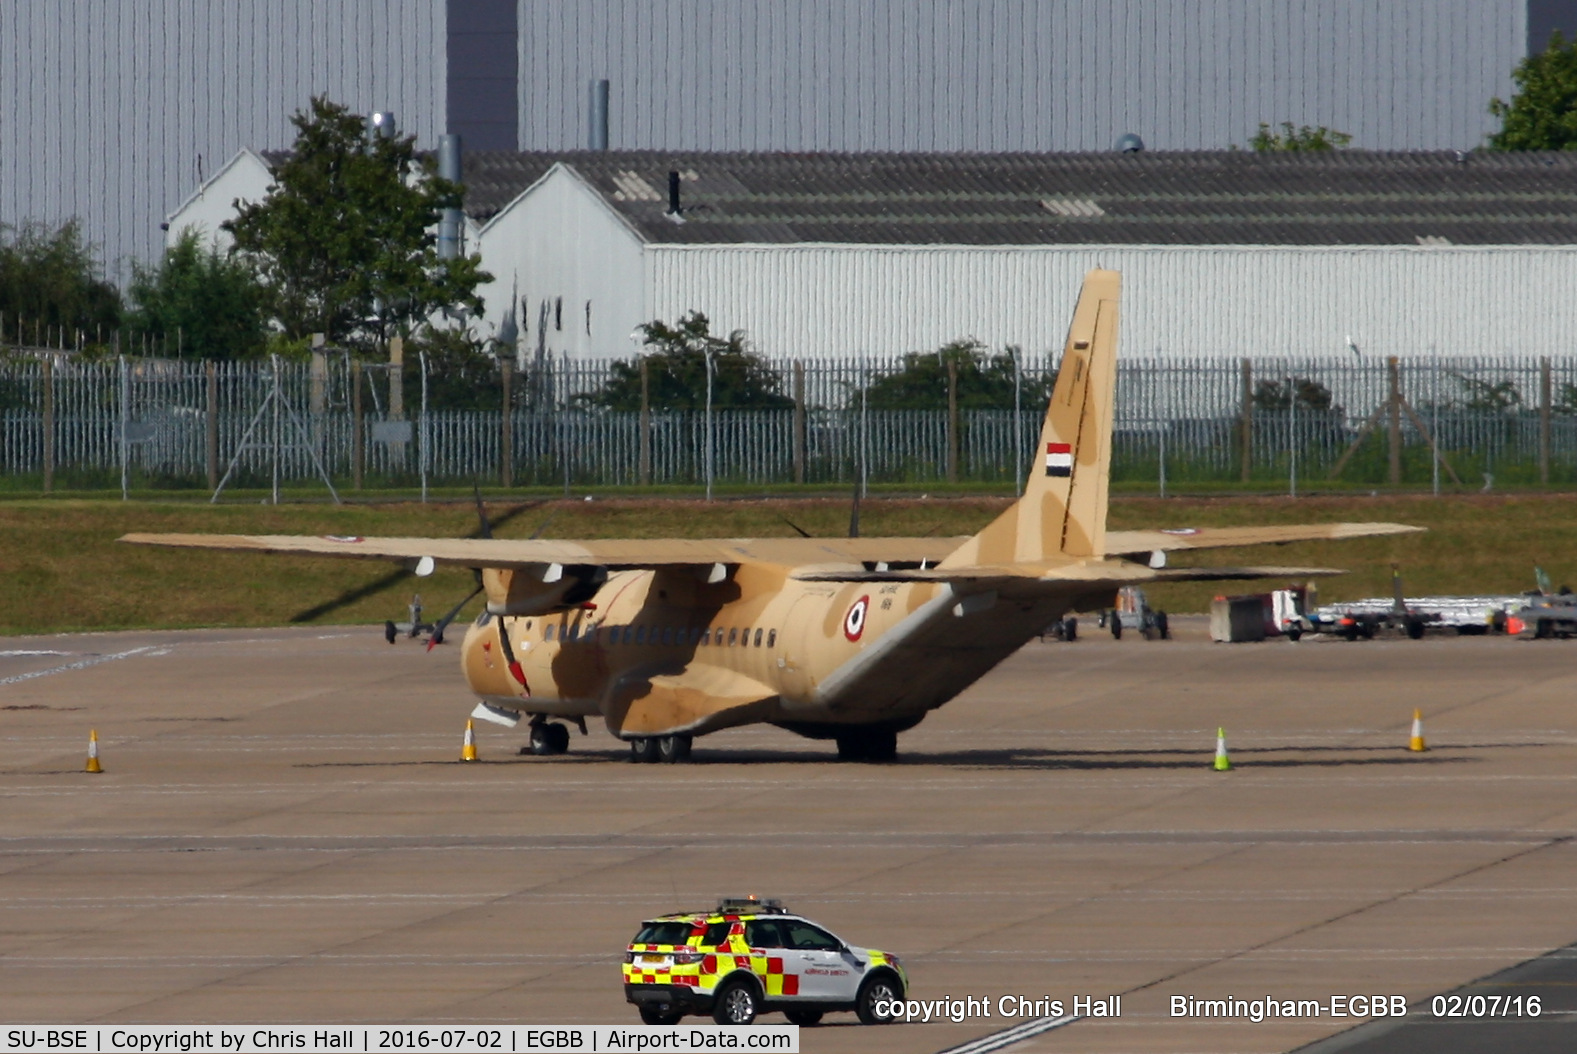 SU-BSE, 2013 CASA C-295M C/N S-103, Egyptian Air Force